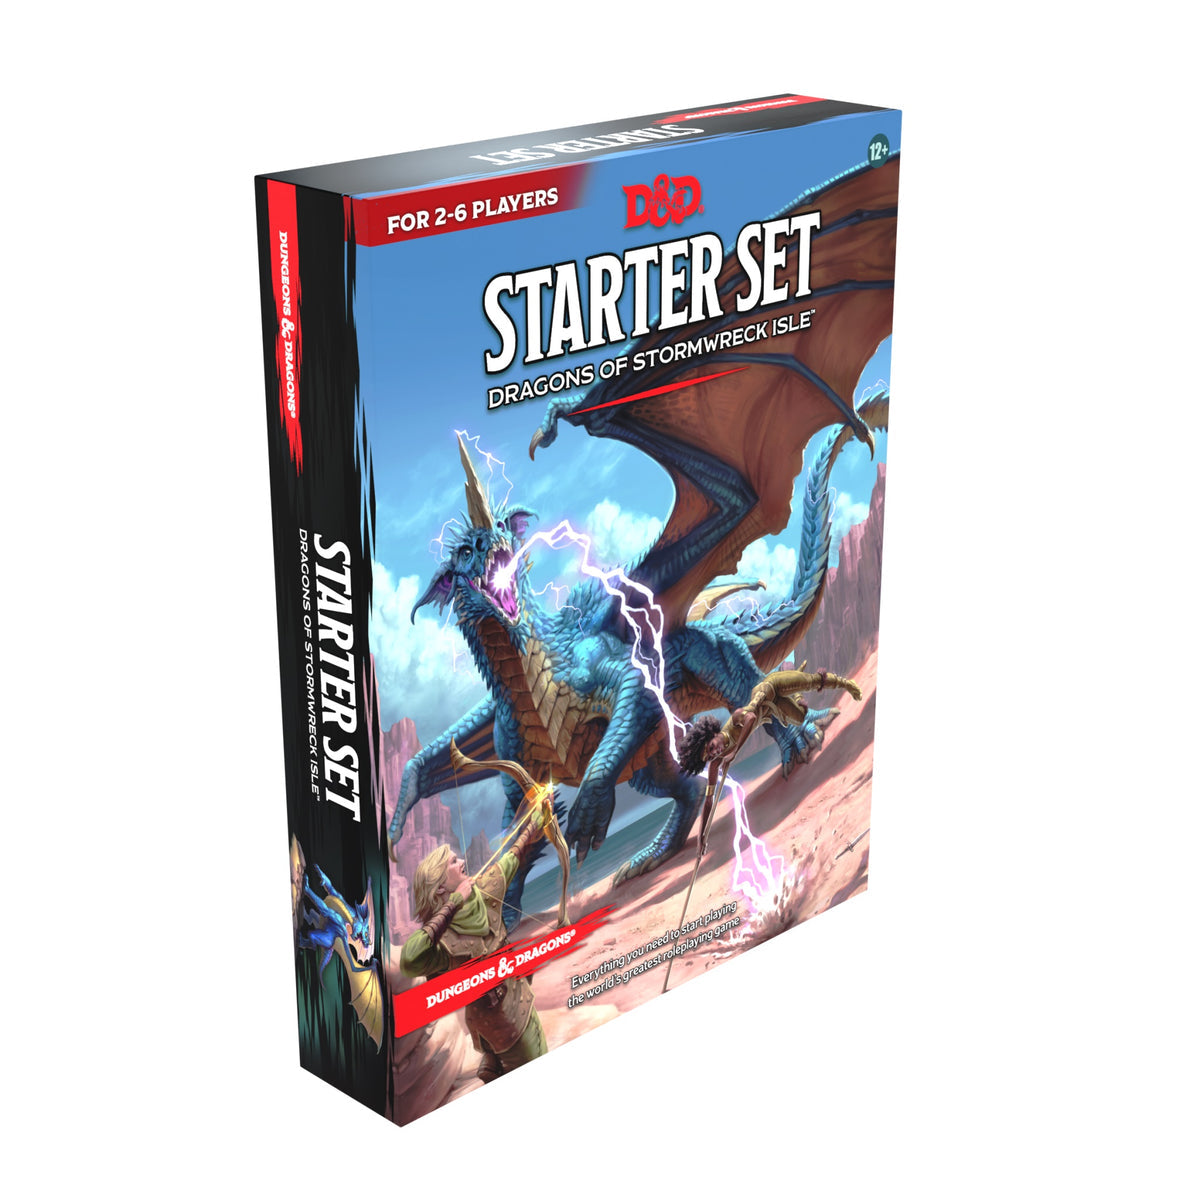 D&D Starter Set: Dragons of Stormwreck Isle | Eastridge Sports Cards & Games